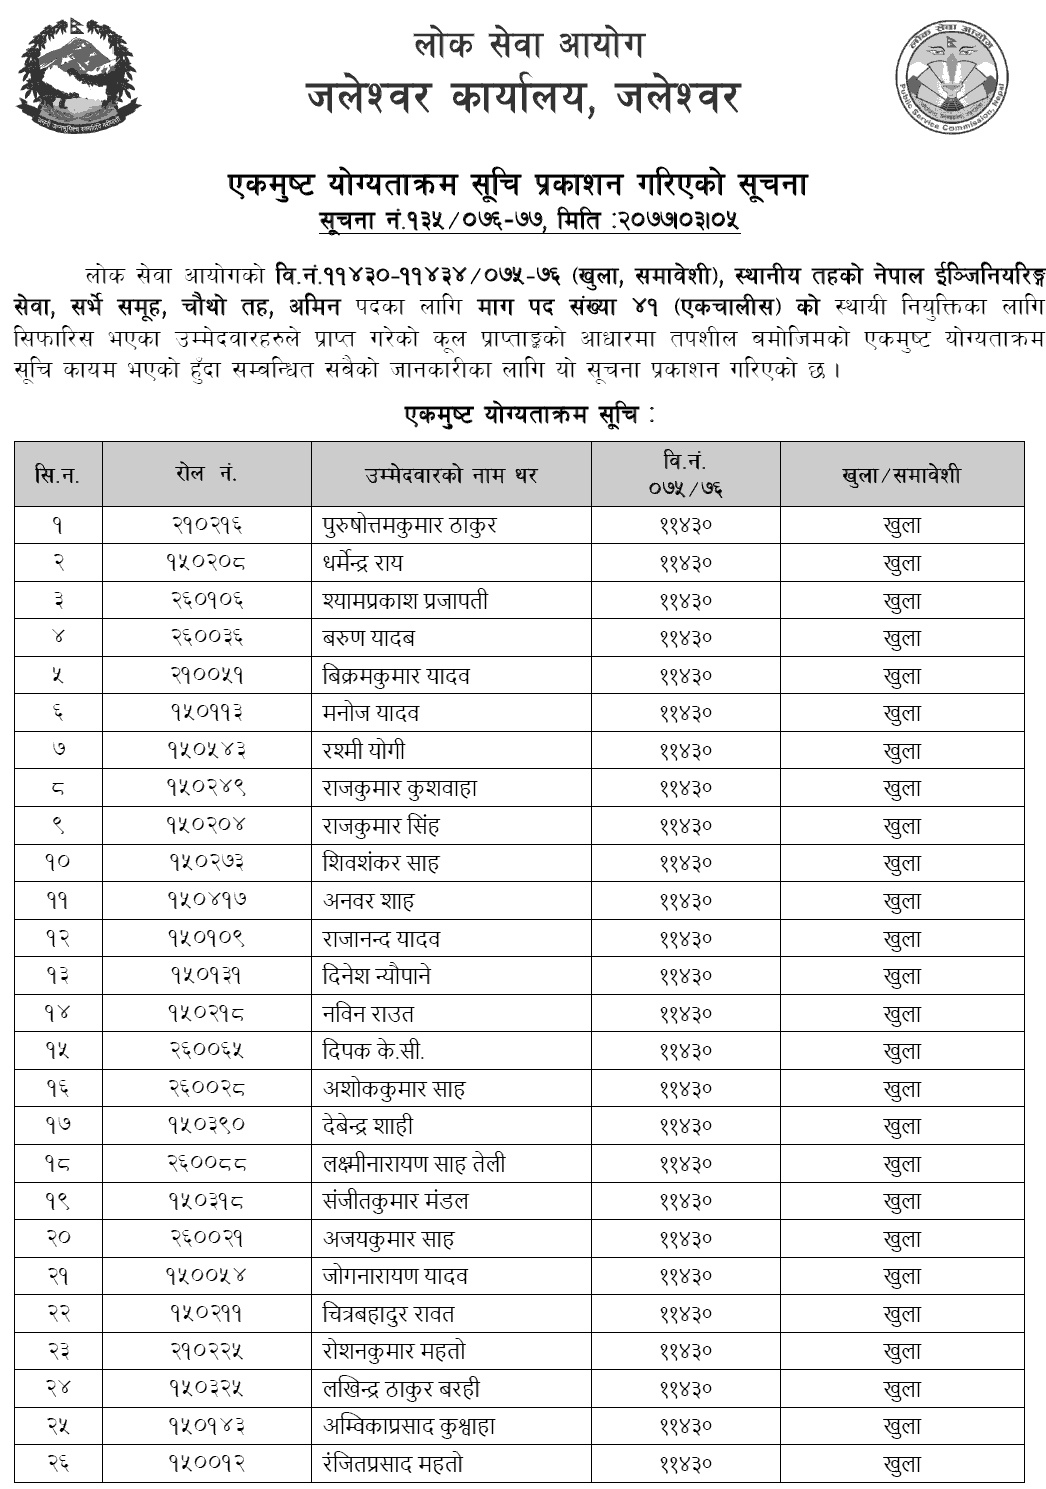 Lok Sewa Aayog Jaleshwor Local Level 4th AMIN Final Result and Recommendation